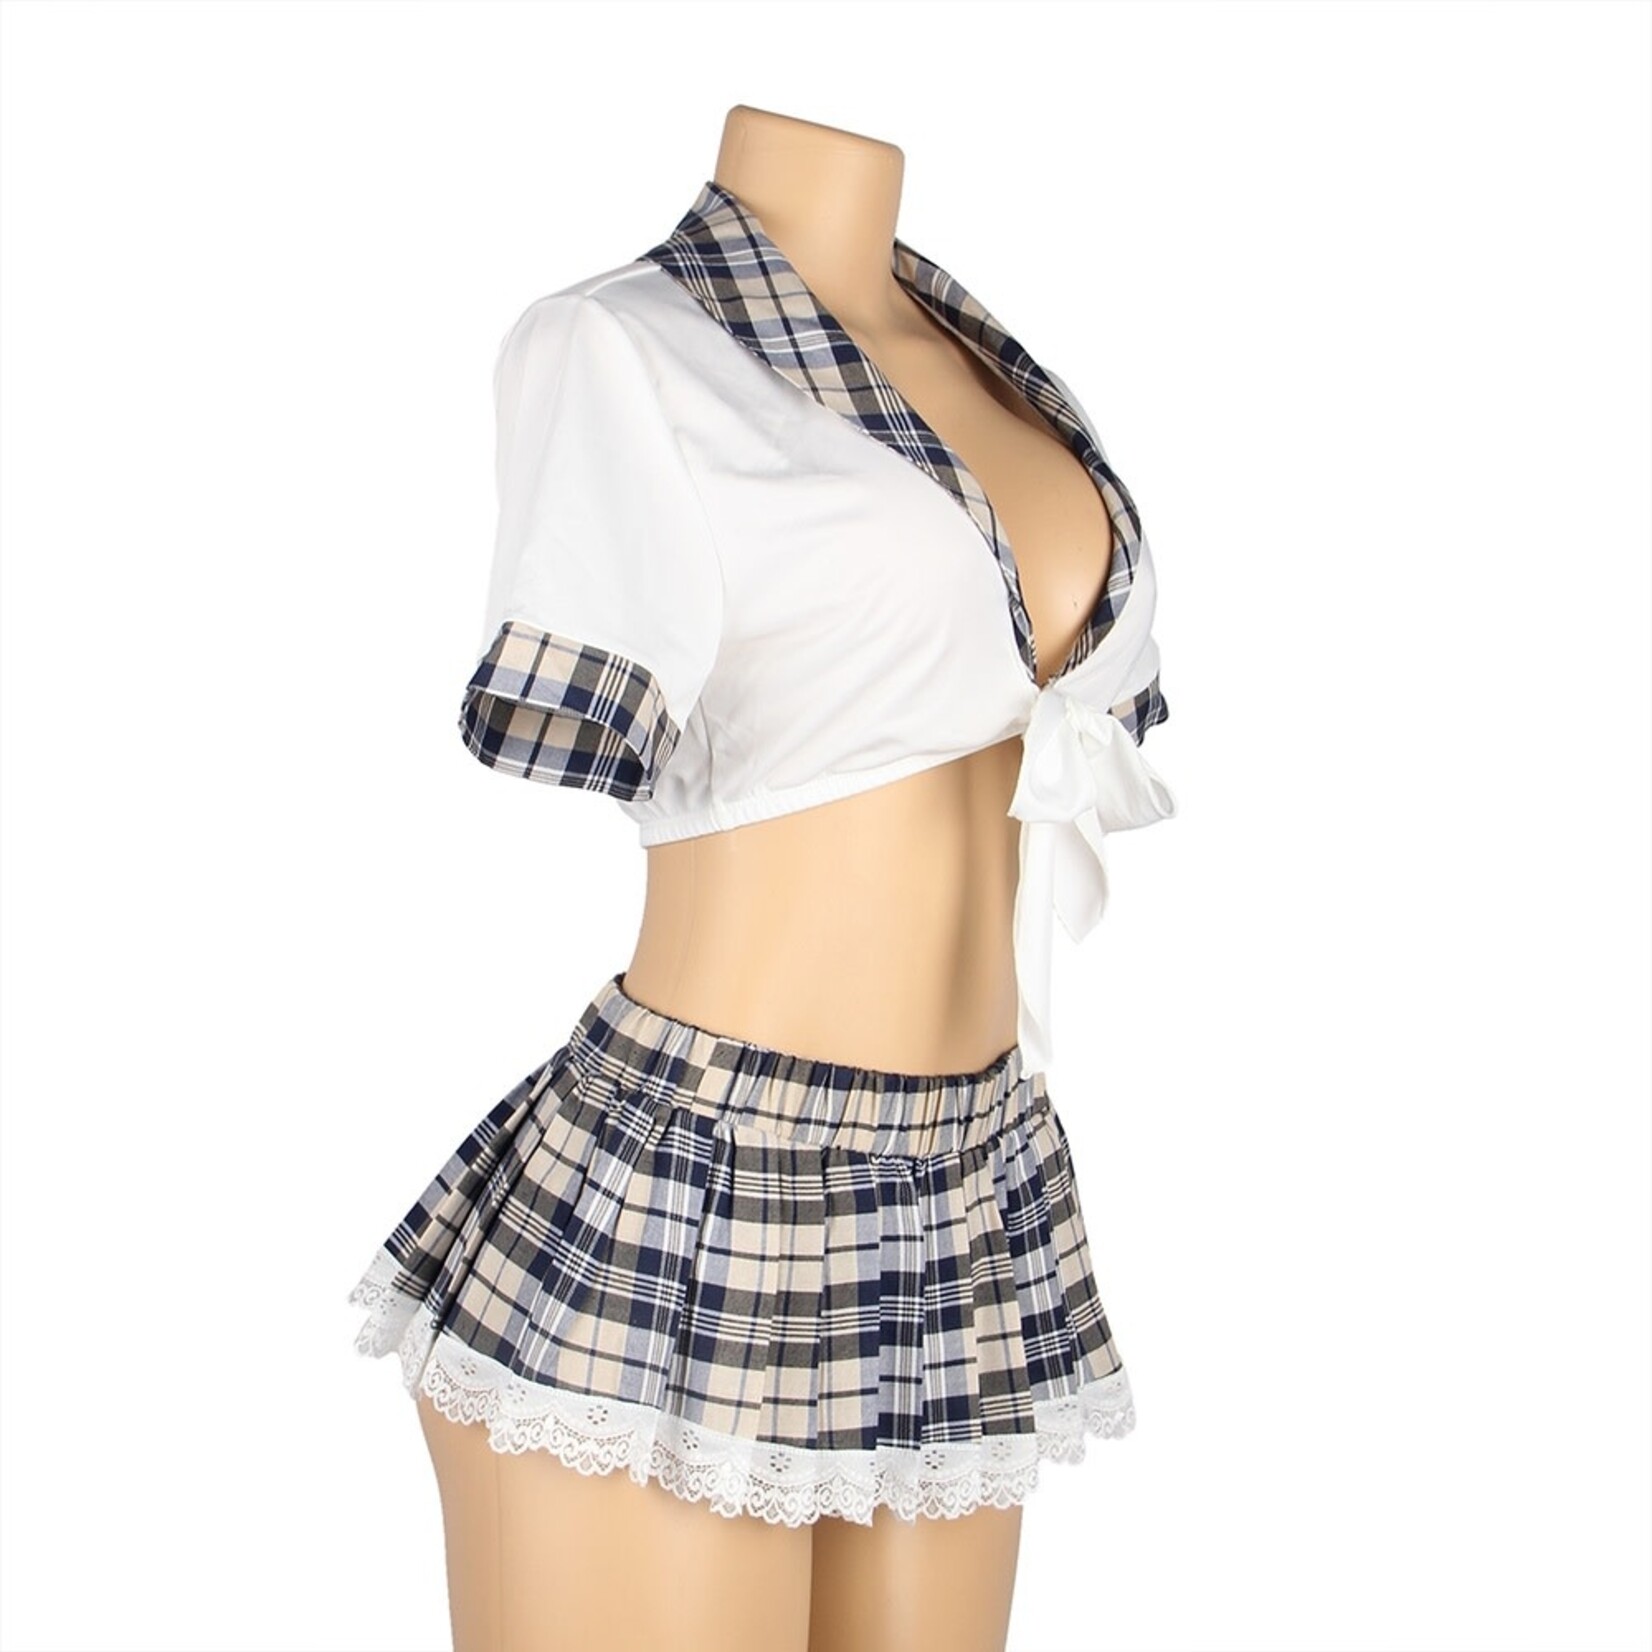 OH YEAH! -  SEXY WHITE CROP TOP PLAID SKIRT COSPLAY SUIT UNIFORM XS-S